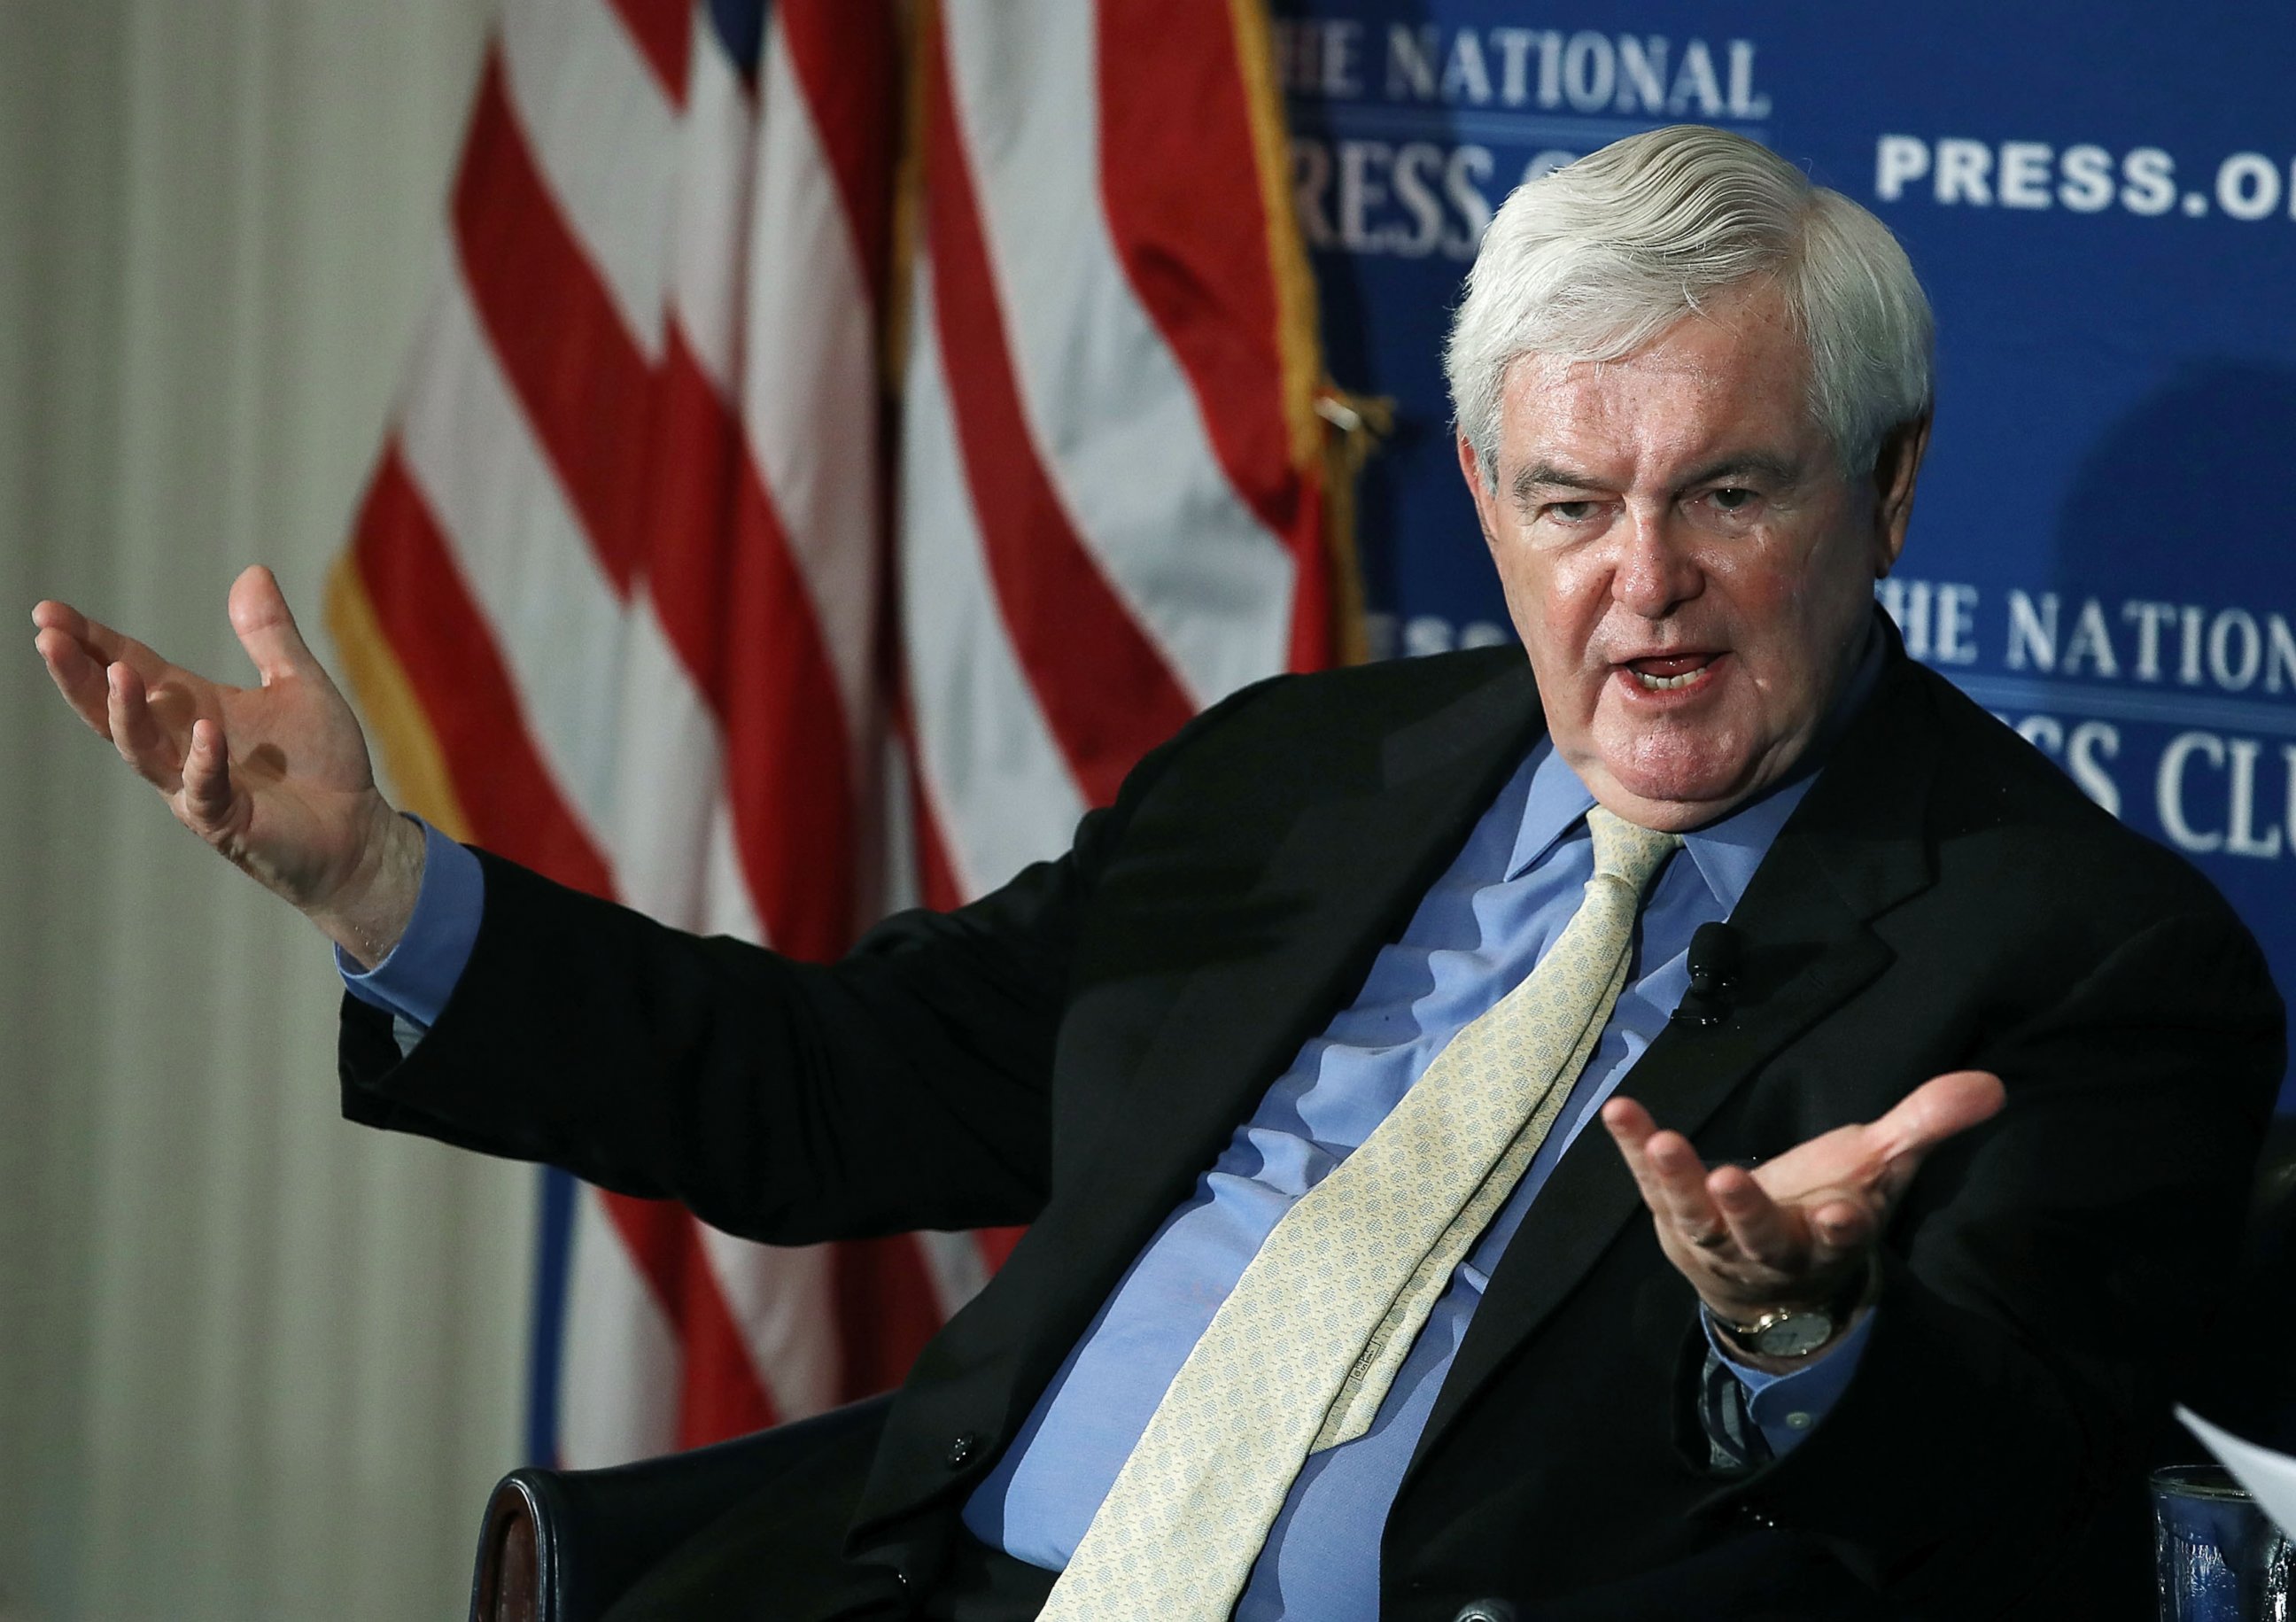 PHOTO: Former House Speaker Newt Gingrich, speaks about his book 'Understanding Trump' during a book discussion at the National Press Club, June 16, 2017 in Washington, D.C. 